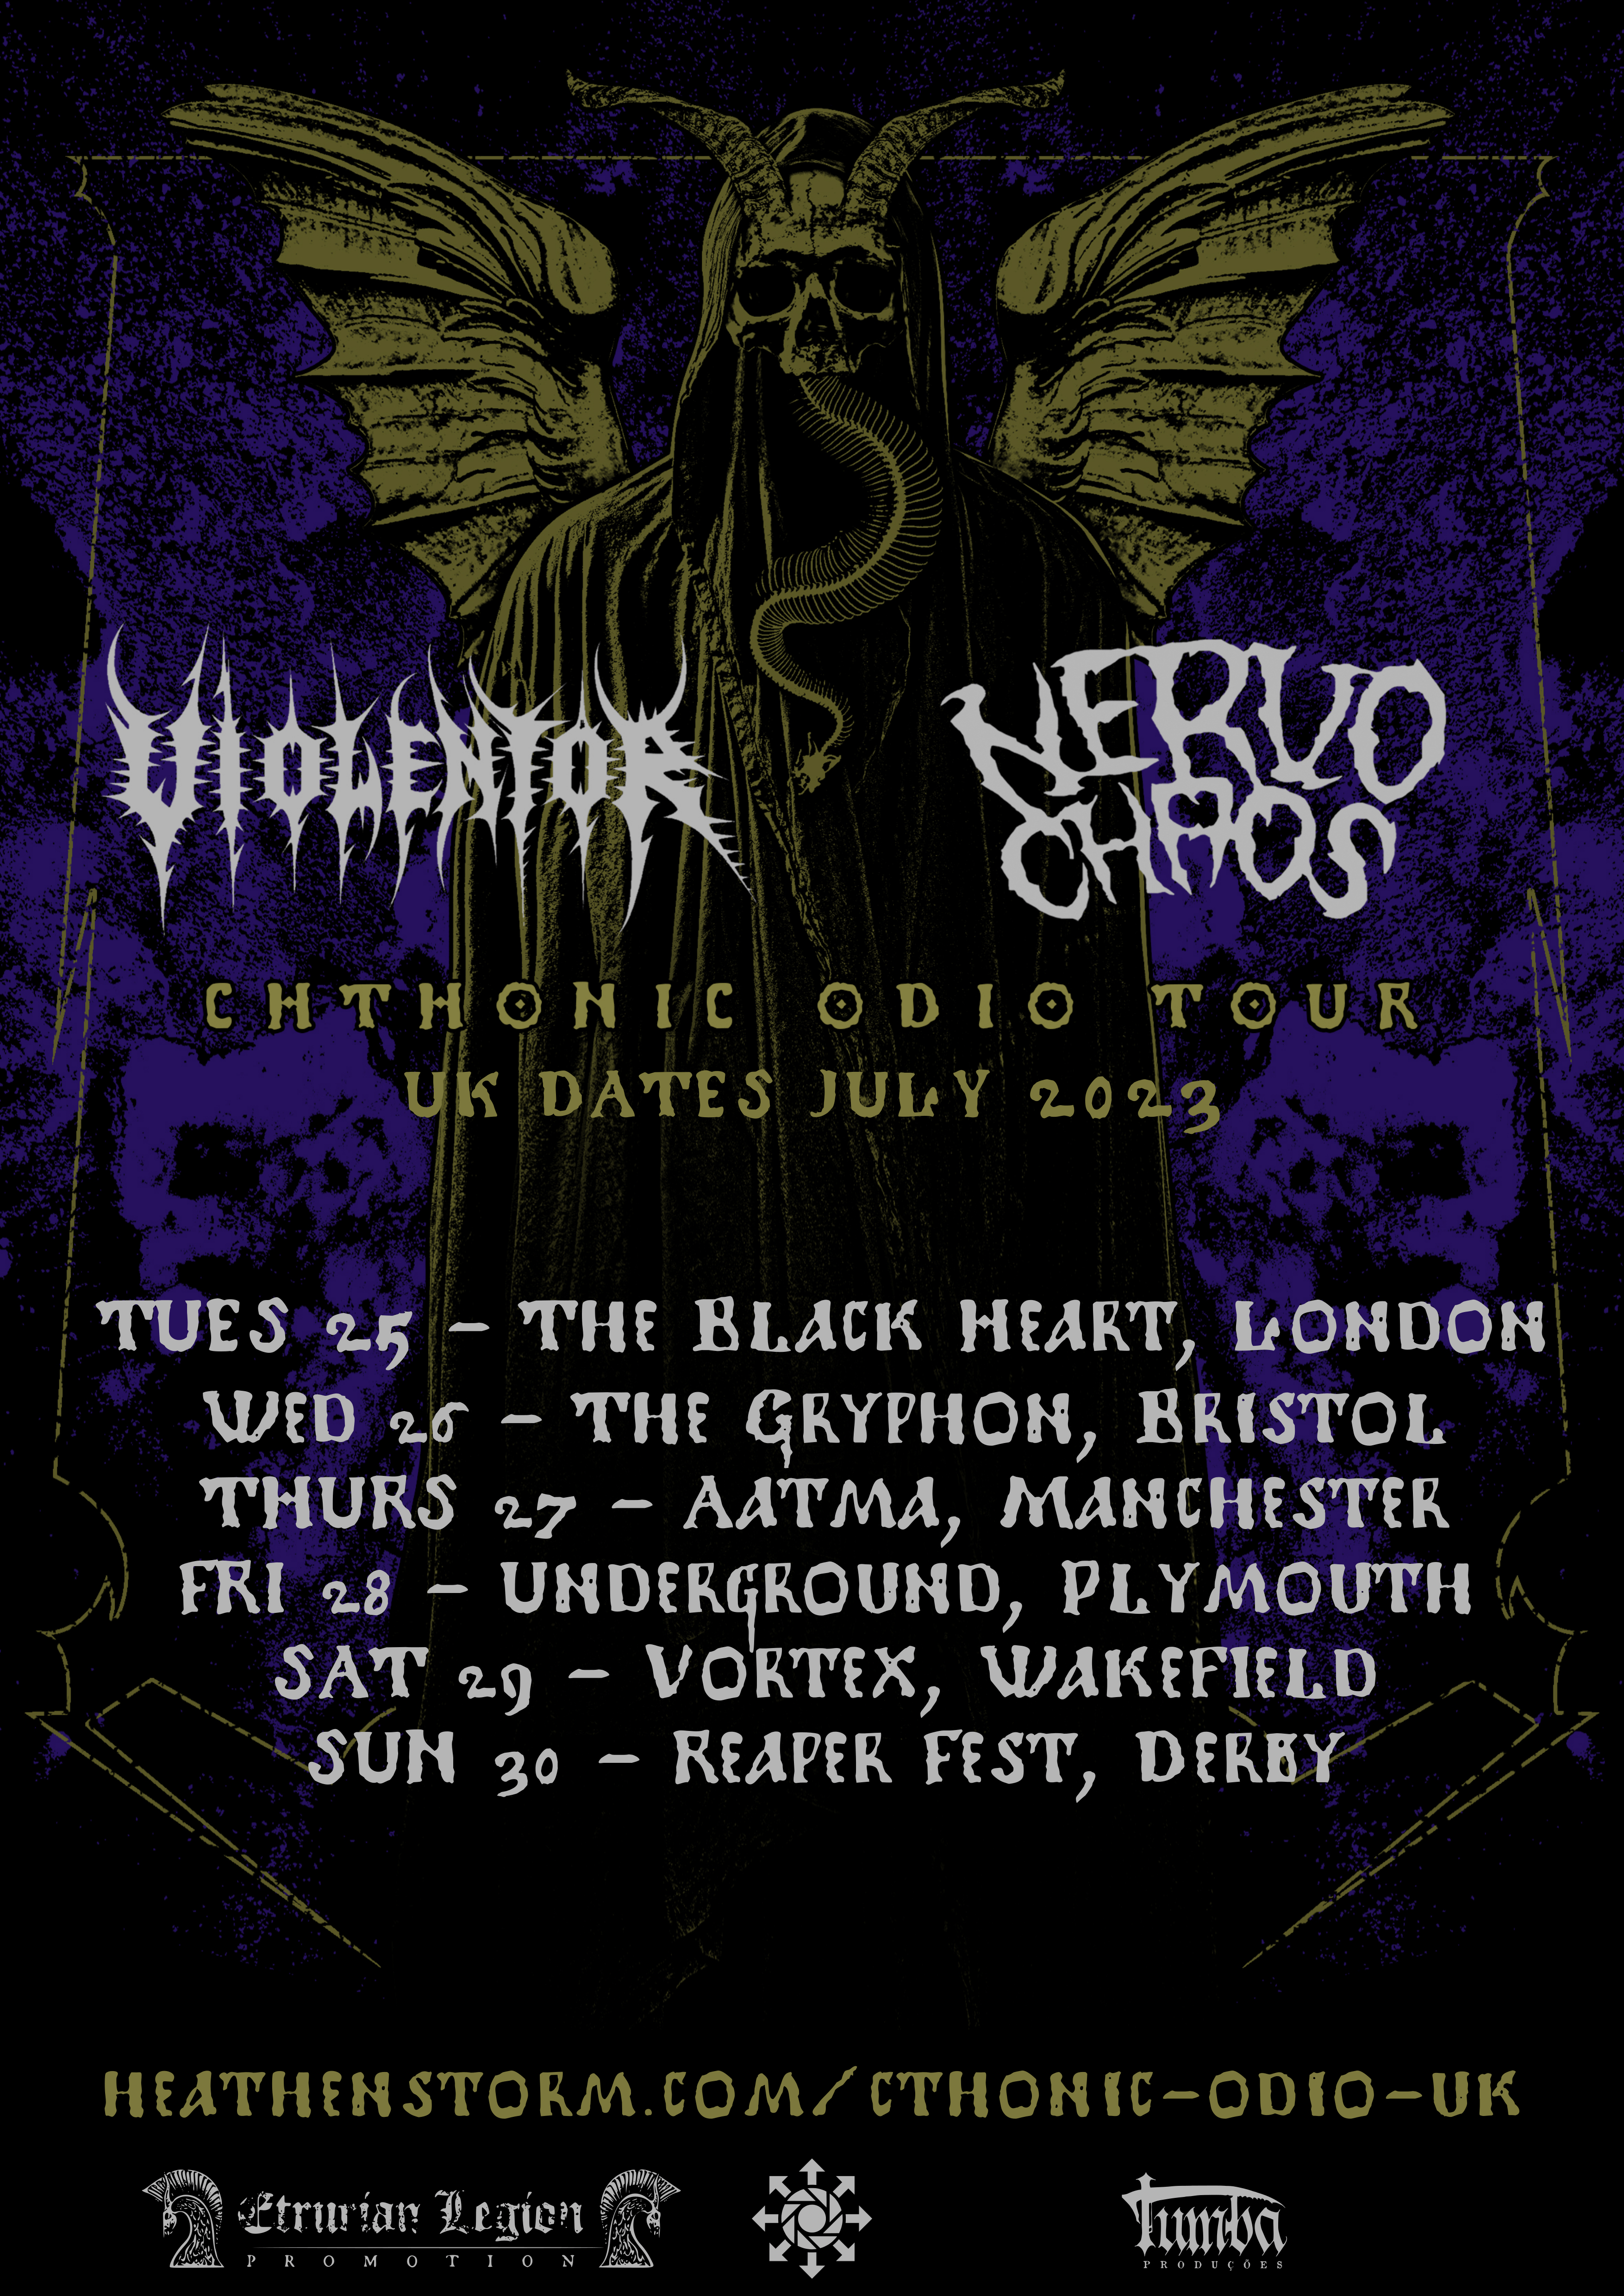 Announcing the Cthonic Odio UK Tour